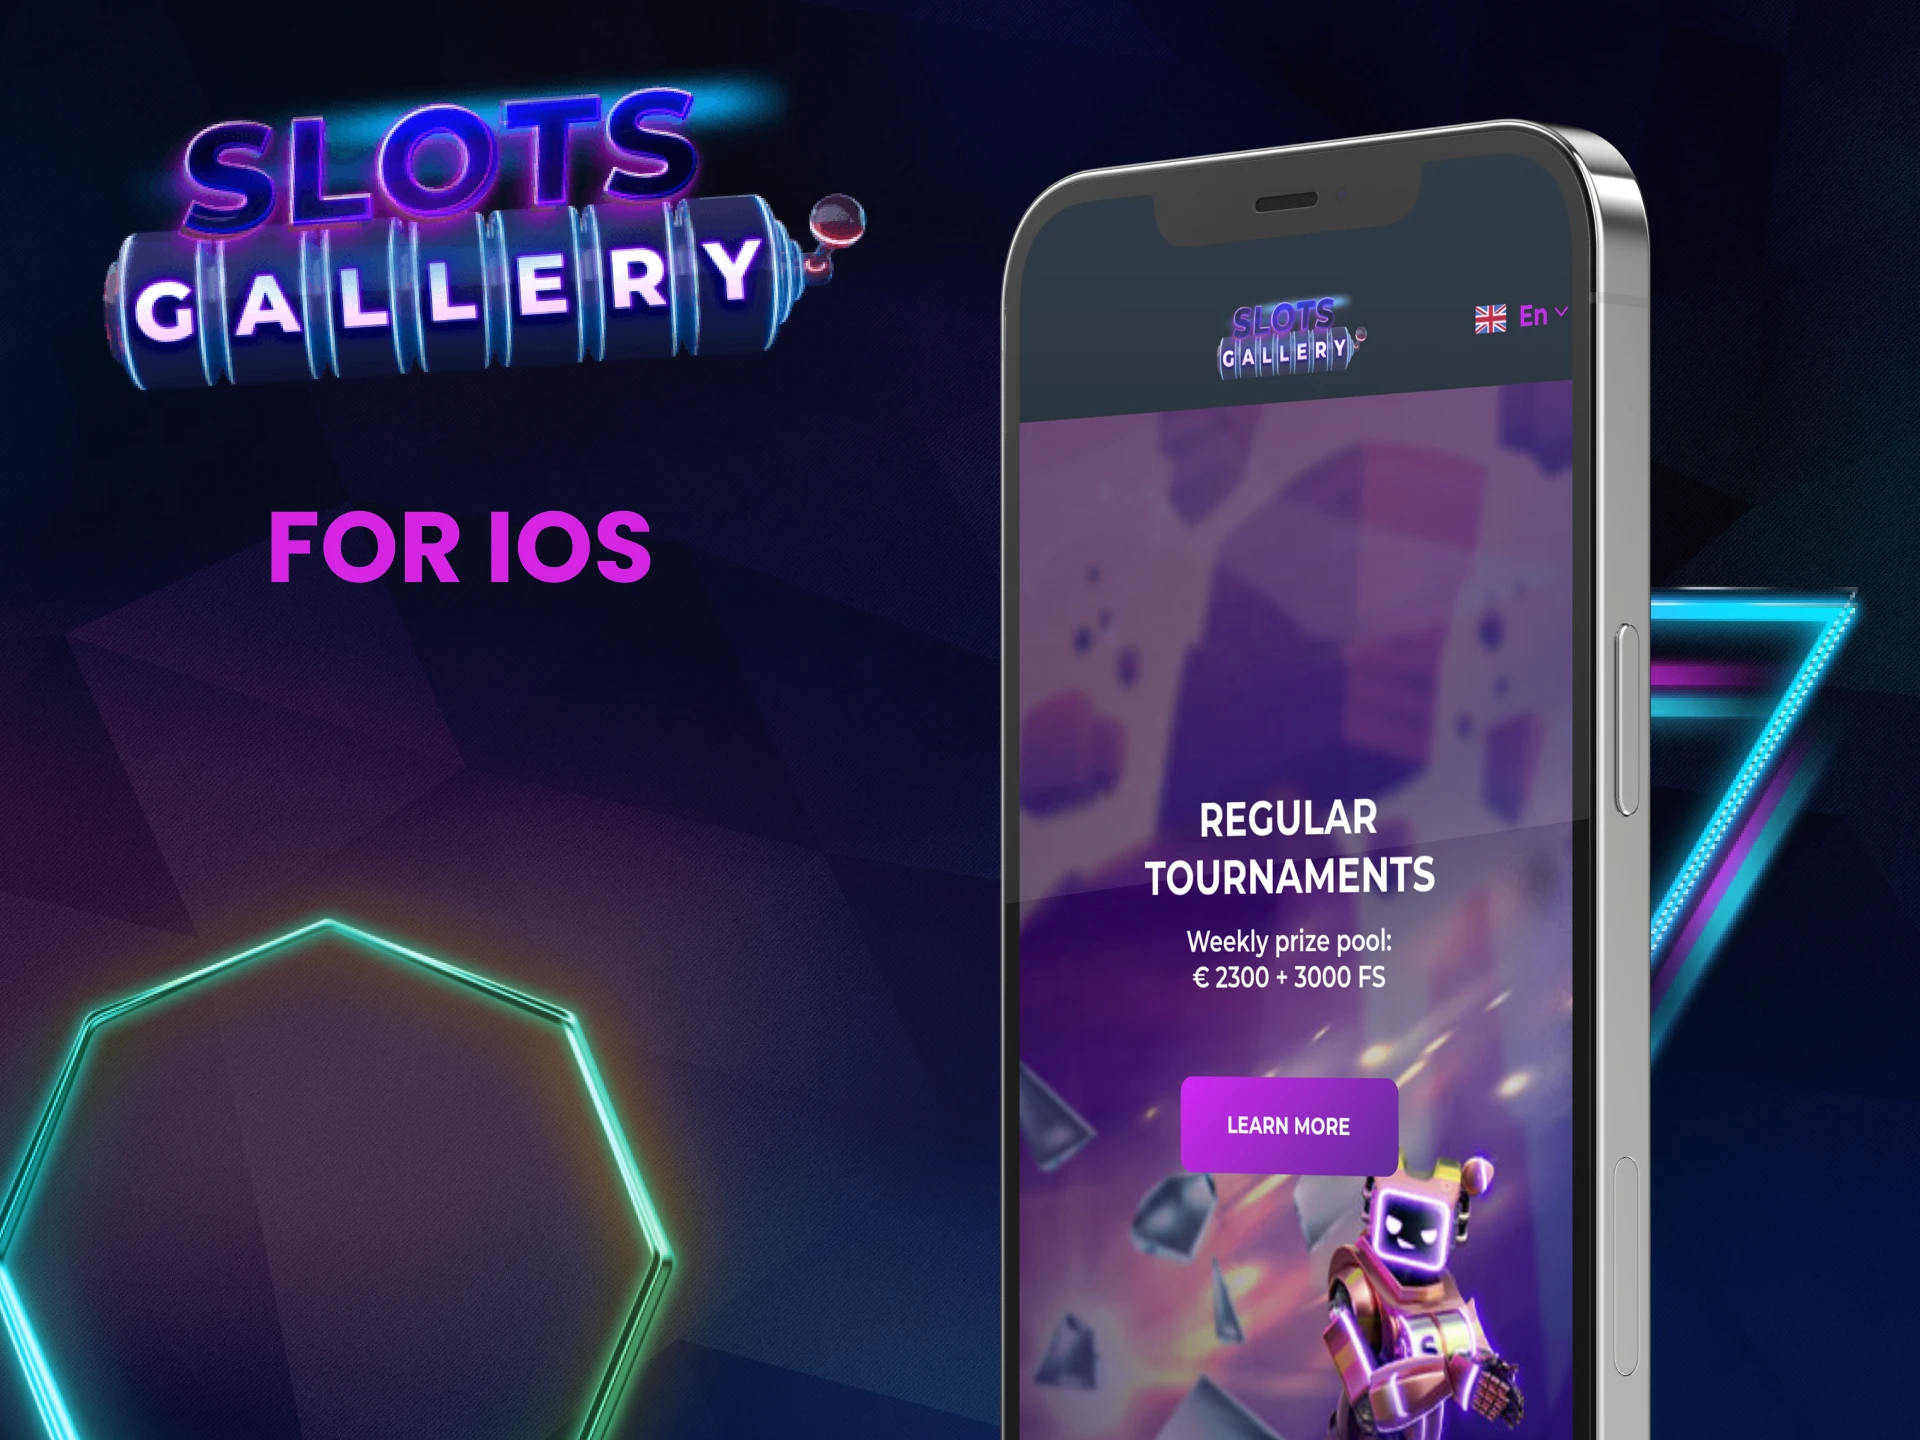 Download the Slots Gallery app for iOS.